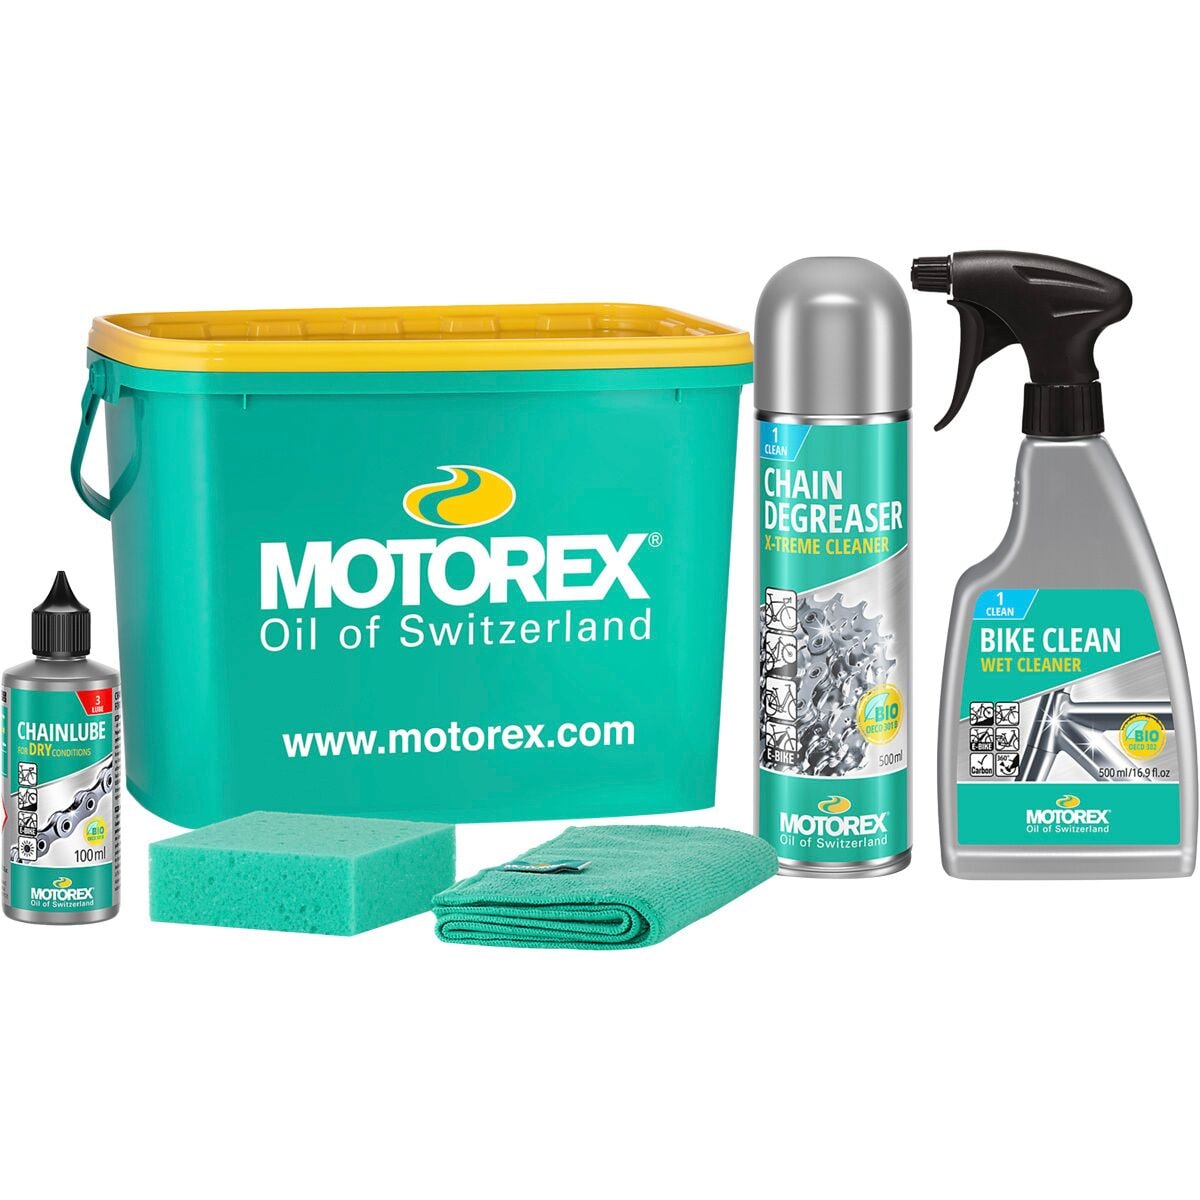 Motorex Bike Cleaning Kit One Color, One Size